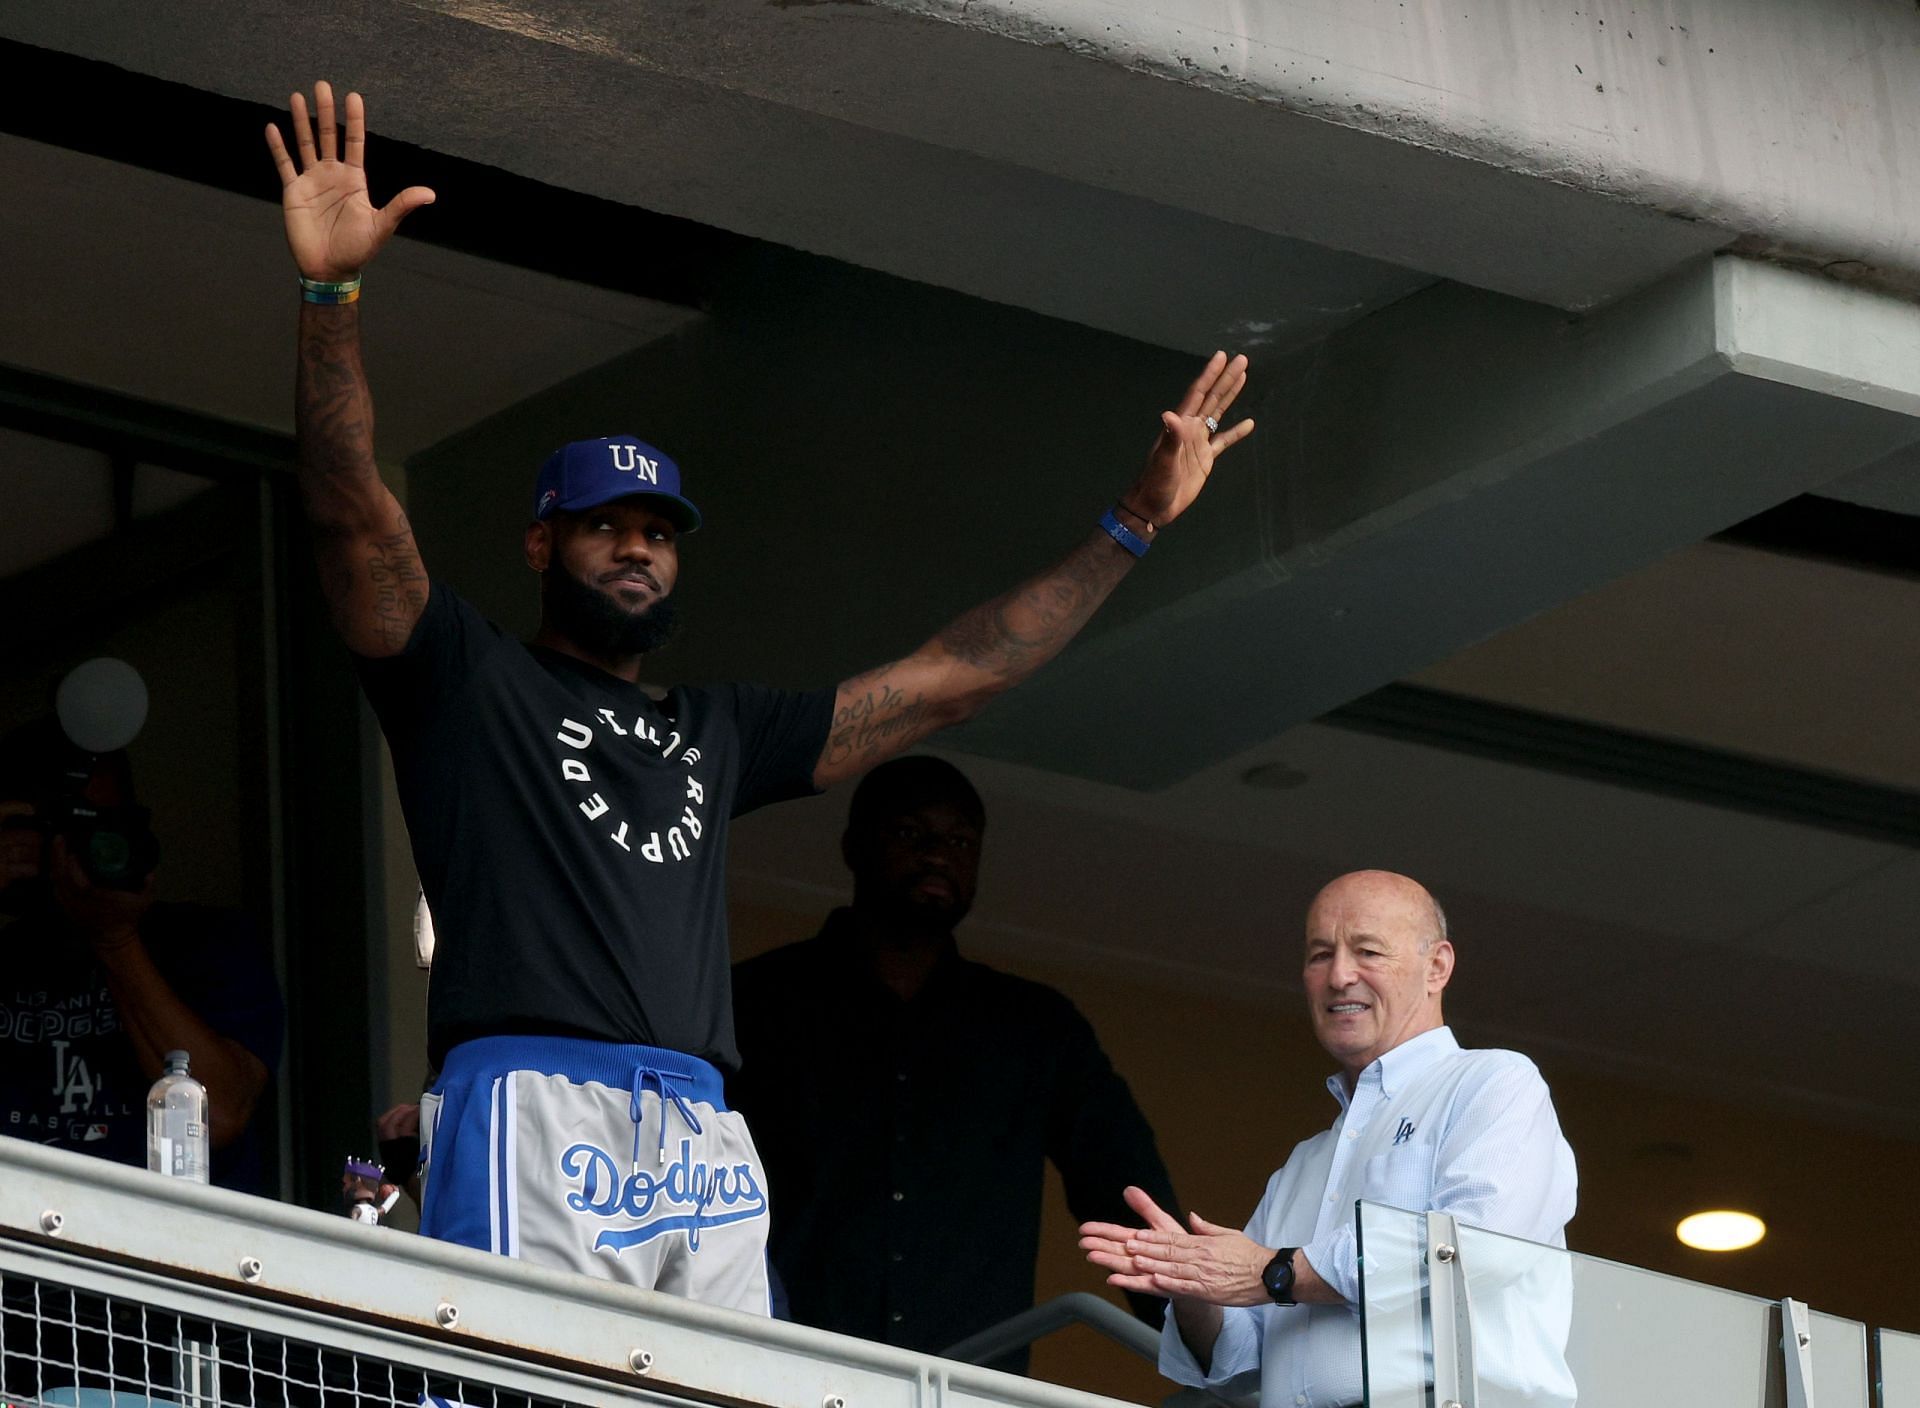 Lakers Star LeBron James Congratulates Dodgers For Making World Series -  Dodger Blue